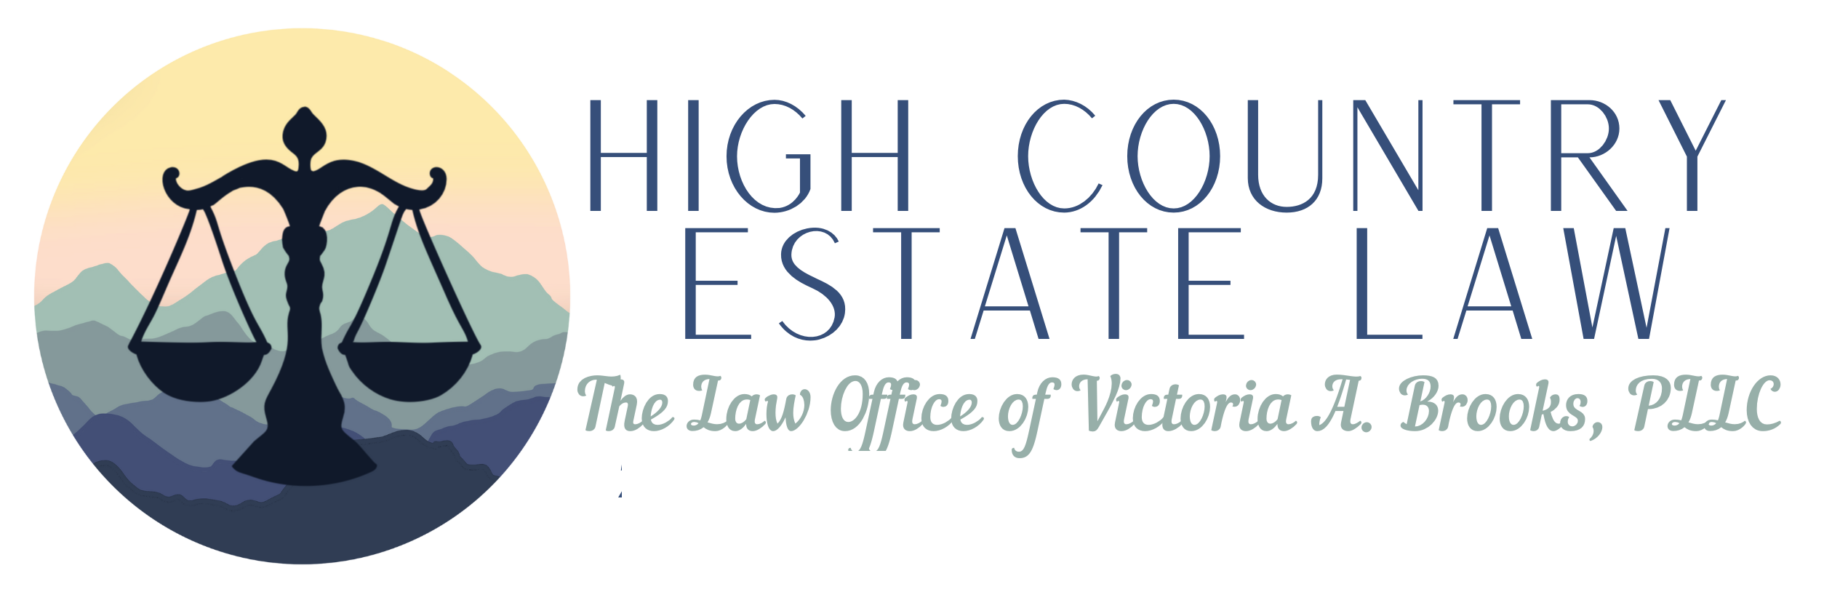 High Country Estate Law